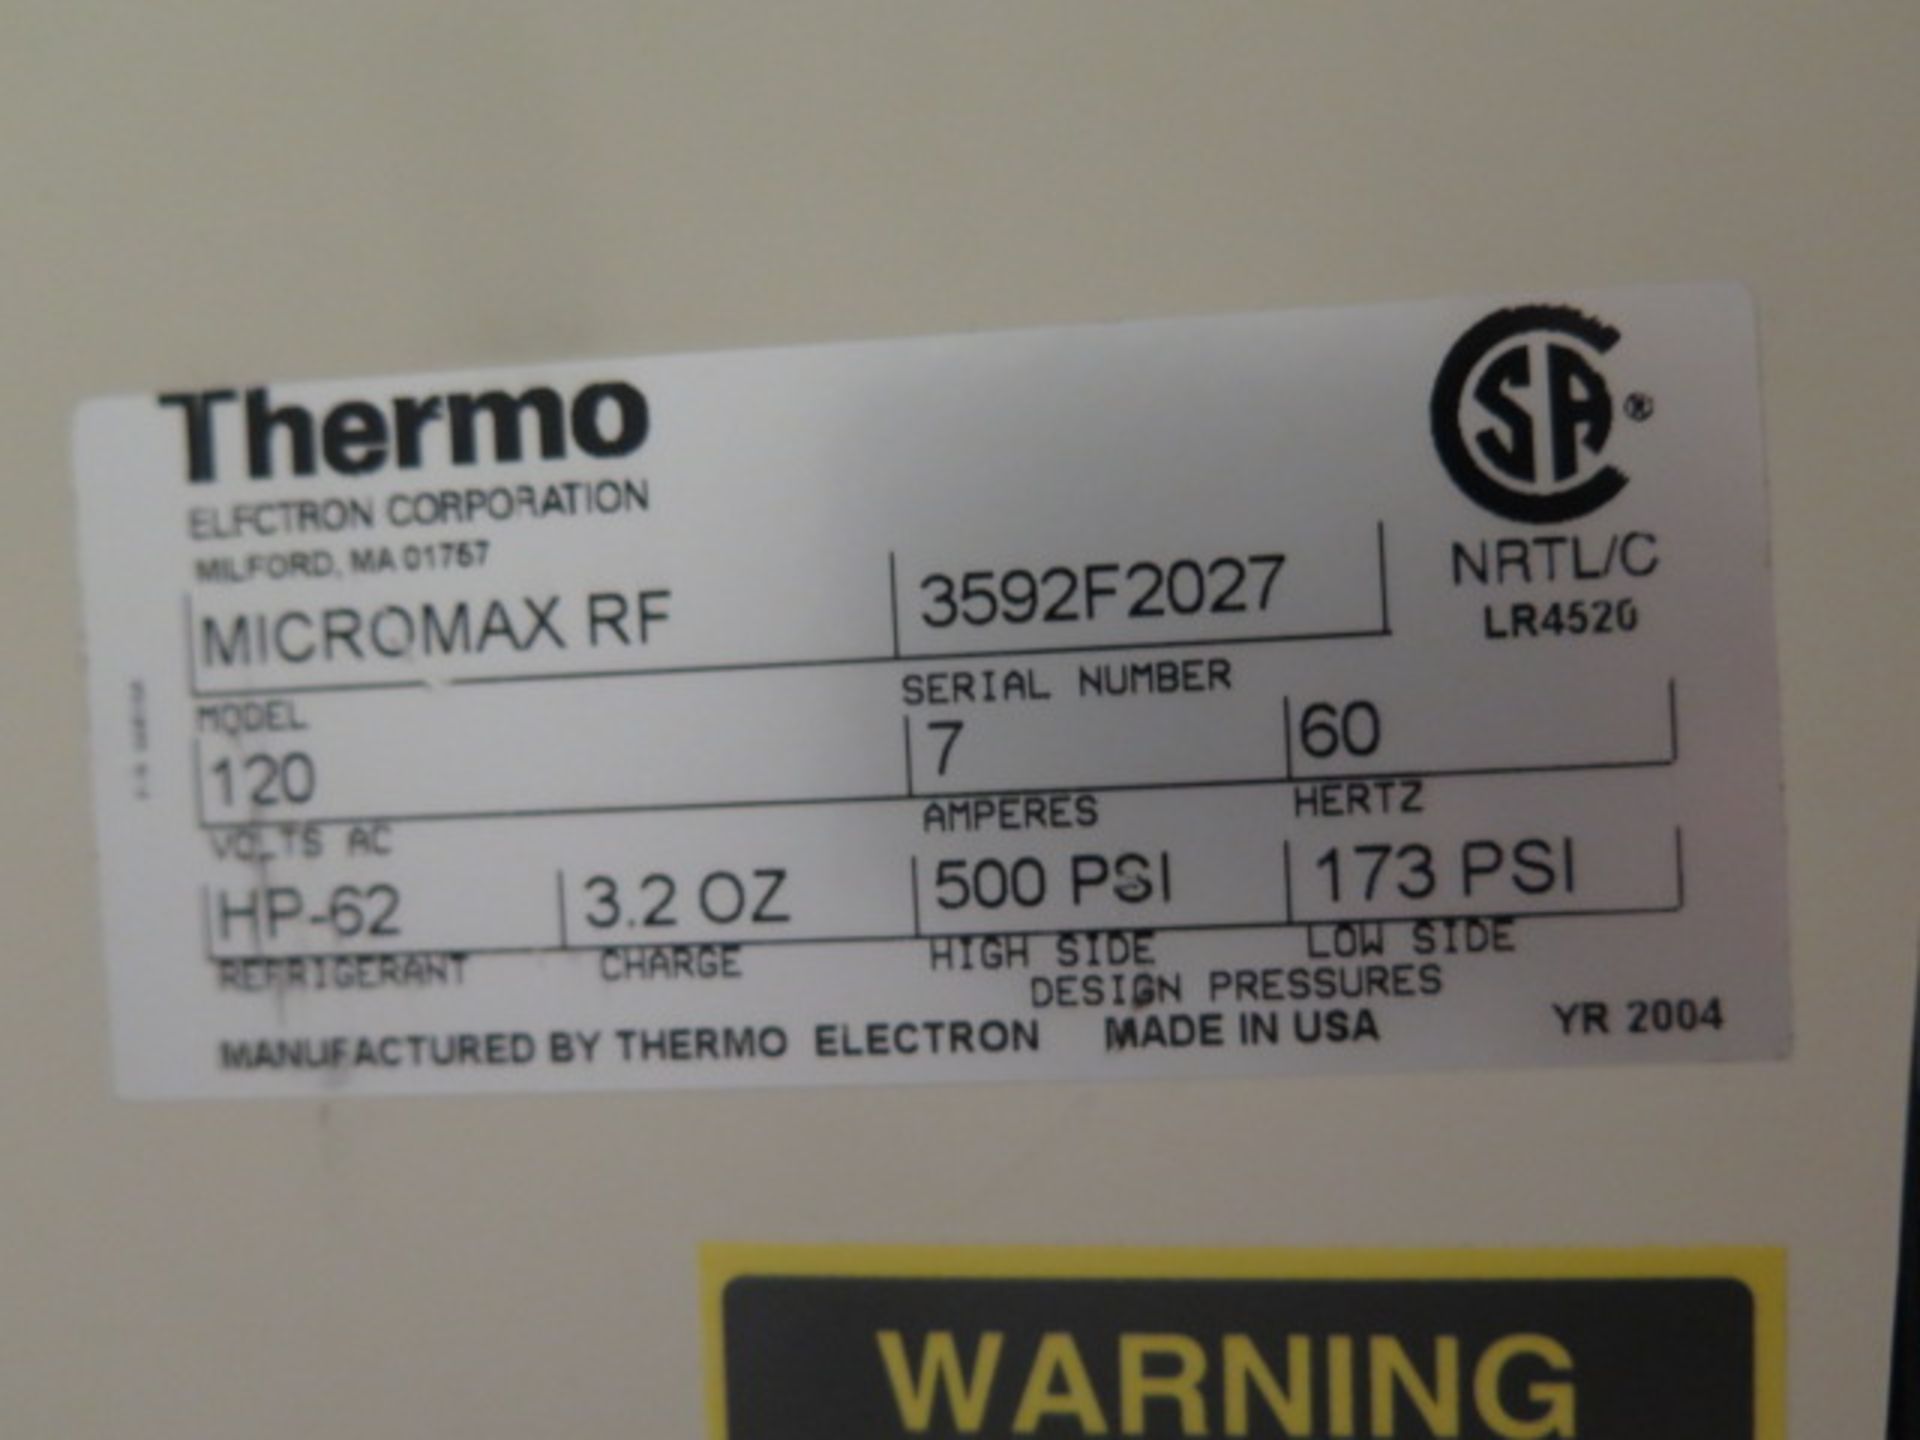 Thermo Electron "Micromax RF" mdl. 120 Refrigerated Microcentrifuge s/n 3592F2027 | Loading - Image 5 of 5